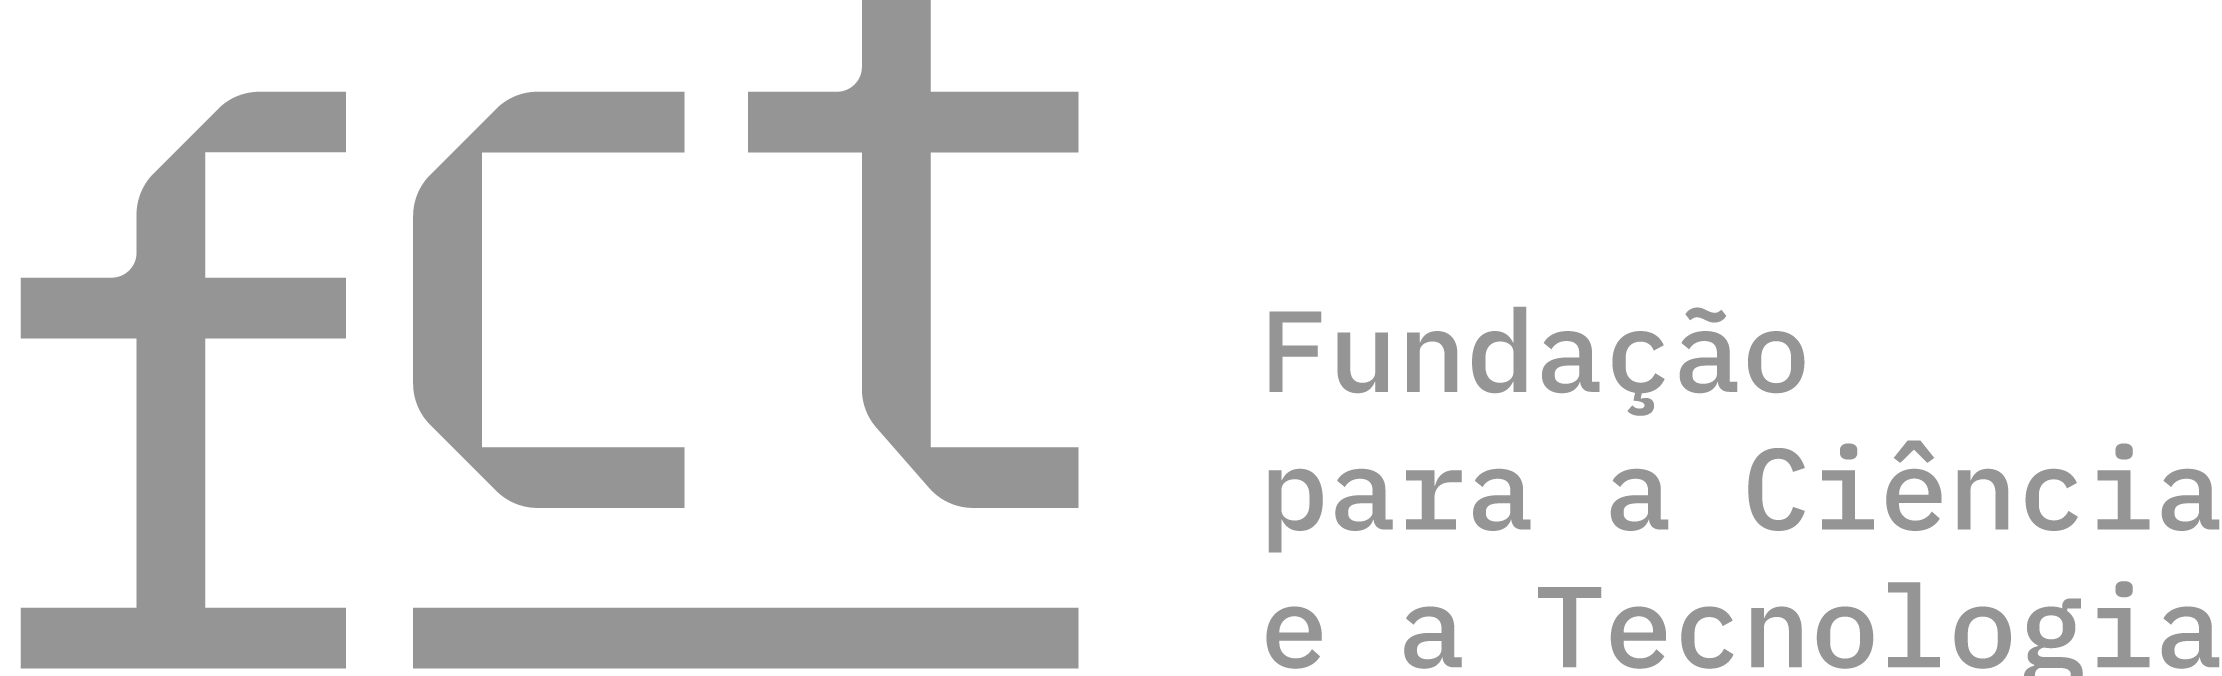 Portuguese Foundation for Science and Technology